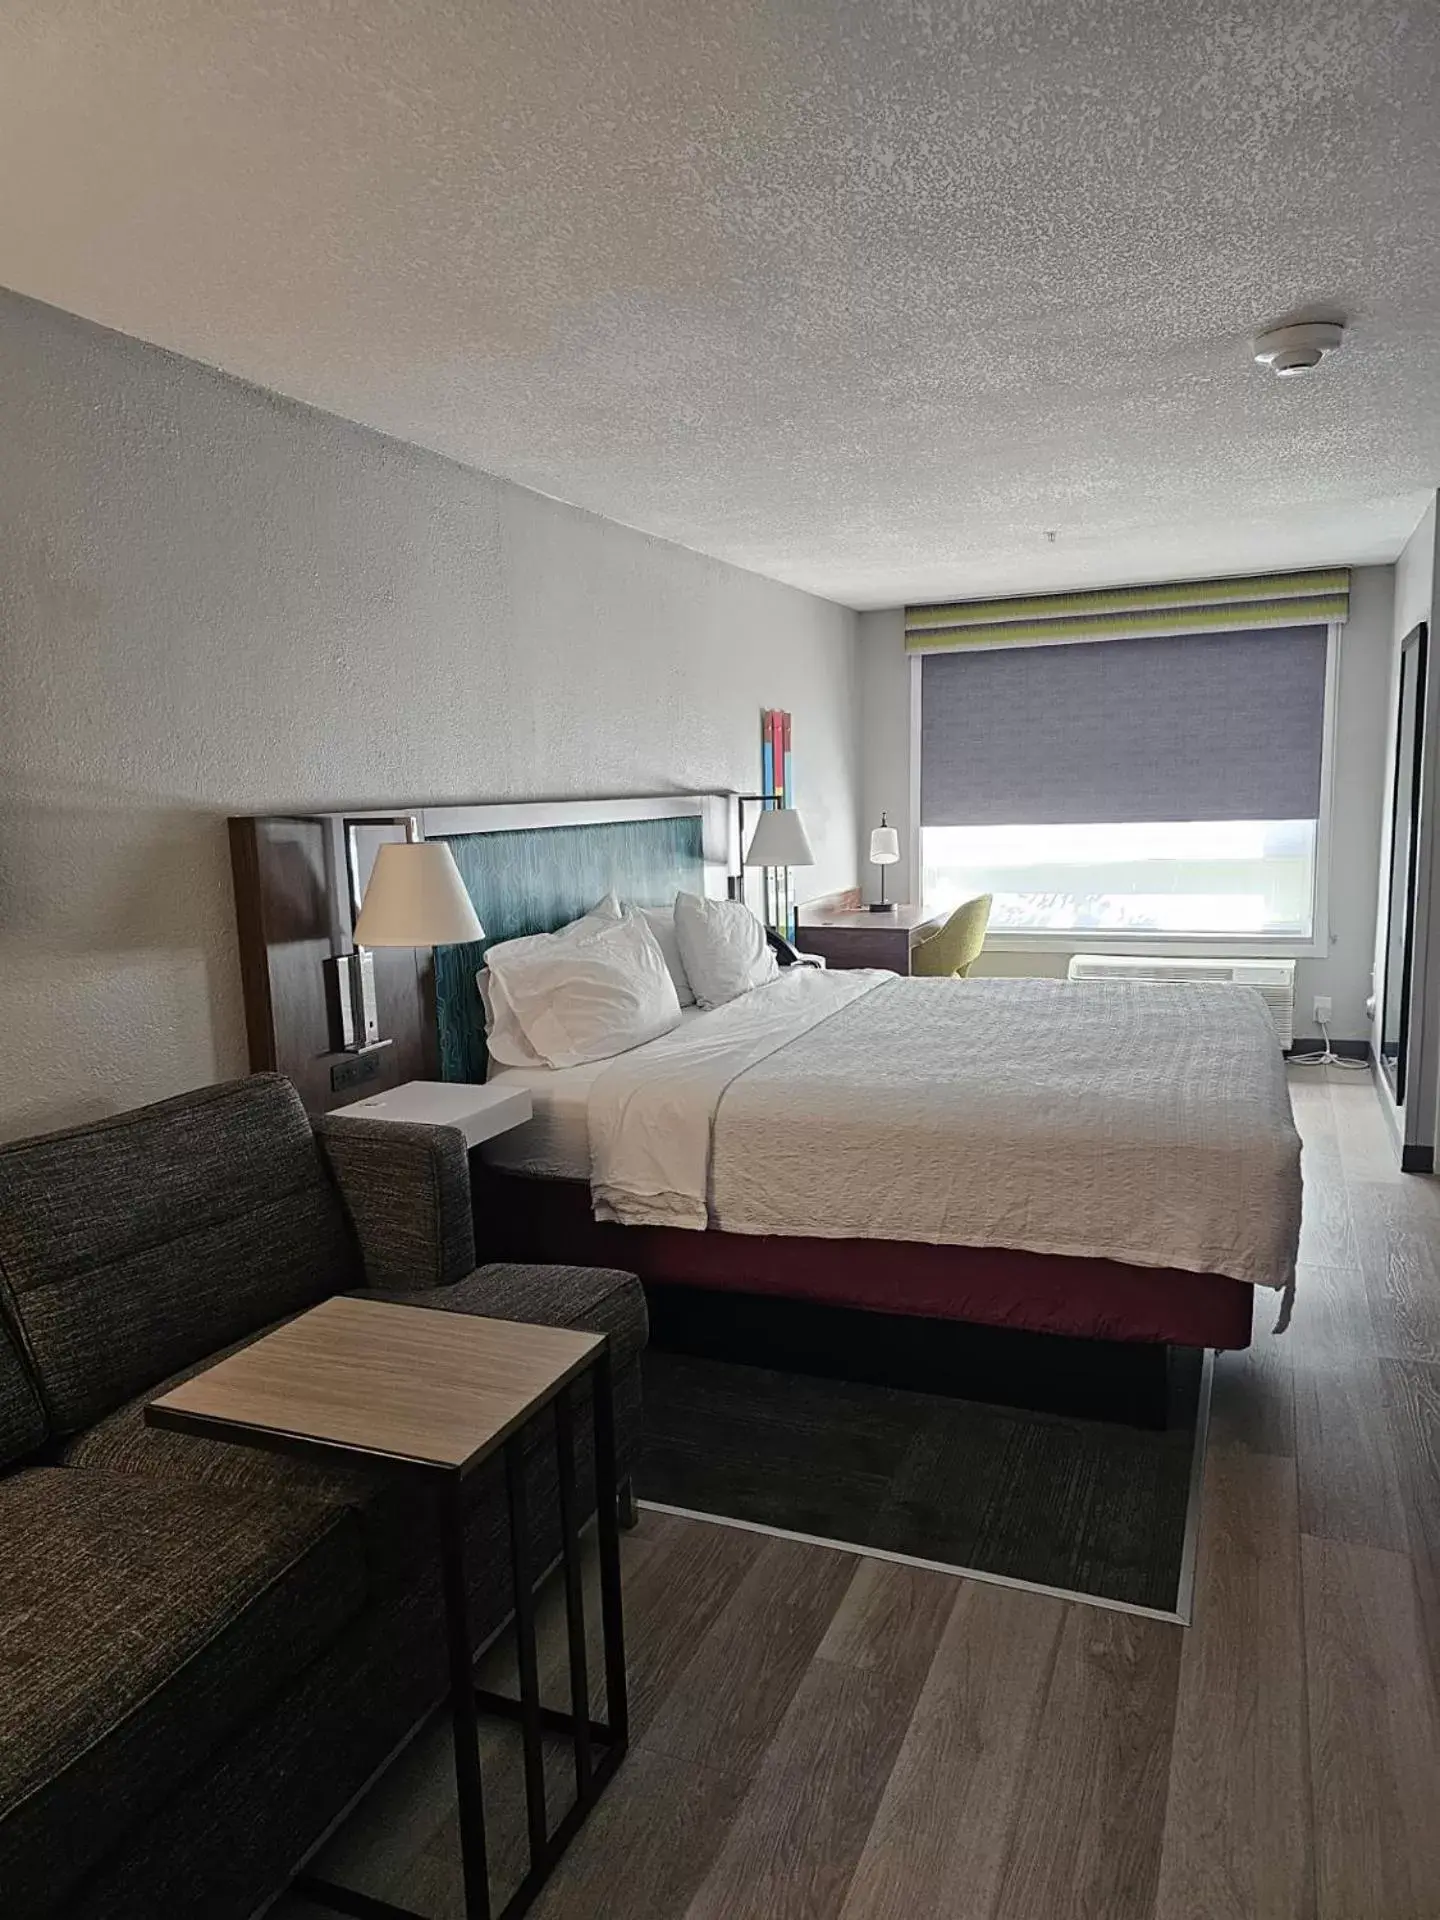 King Room with Sofabed and Microwave/Fridge in Hampton Inn Weston Fort Lauderdale